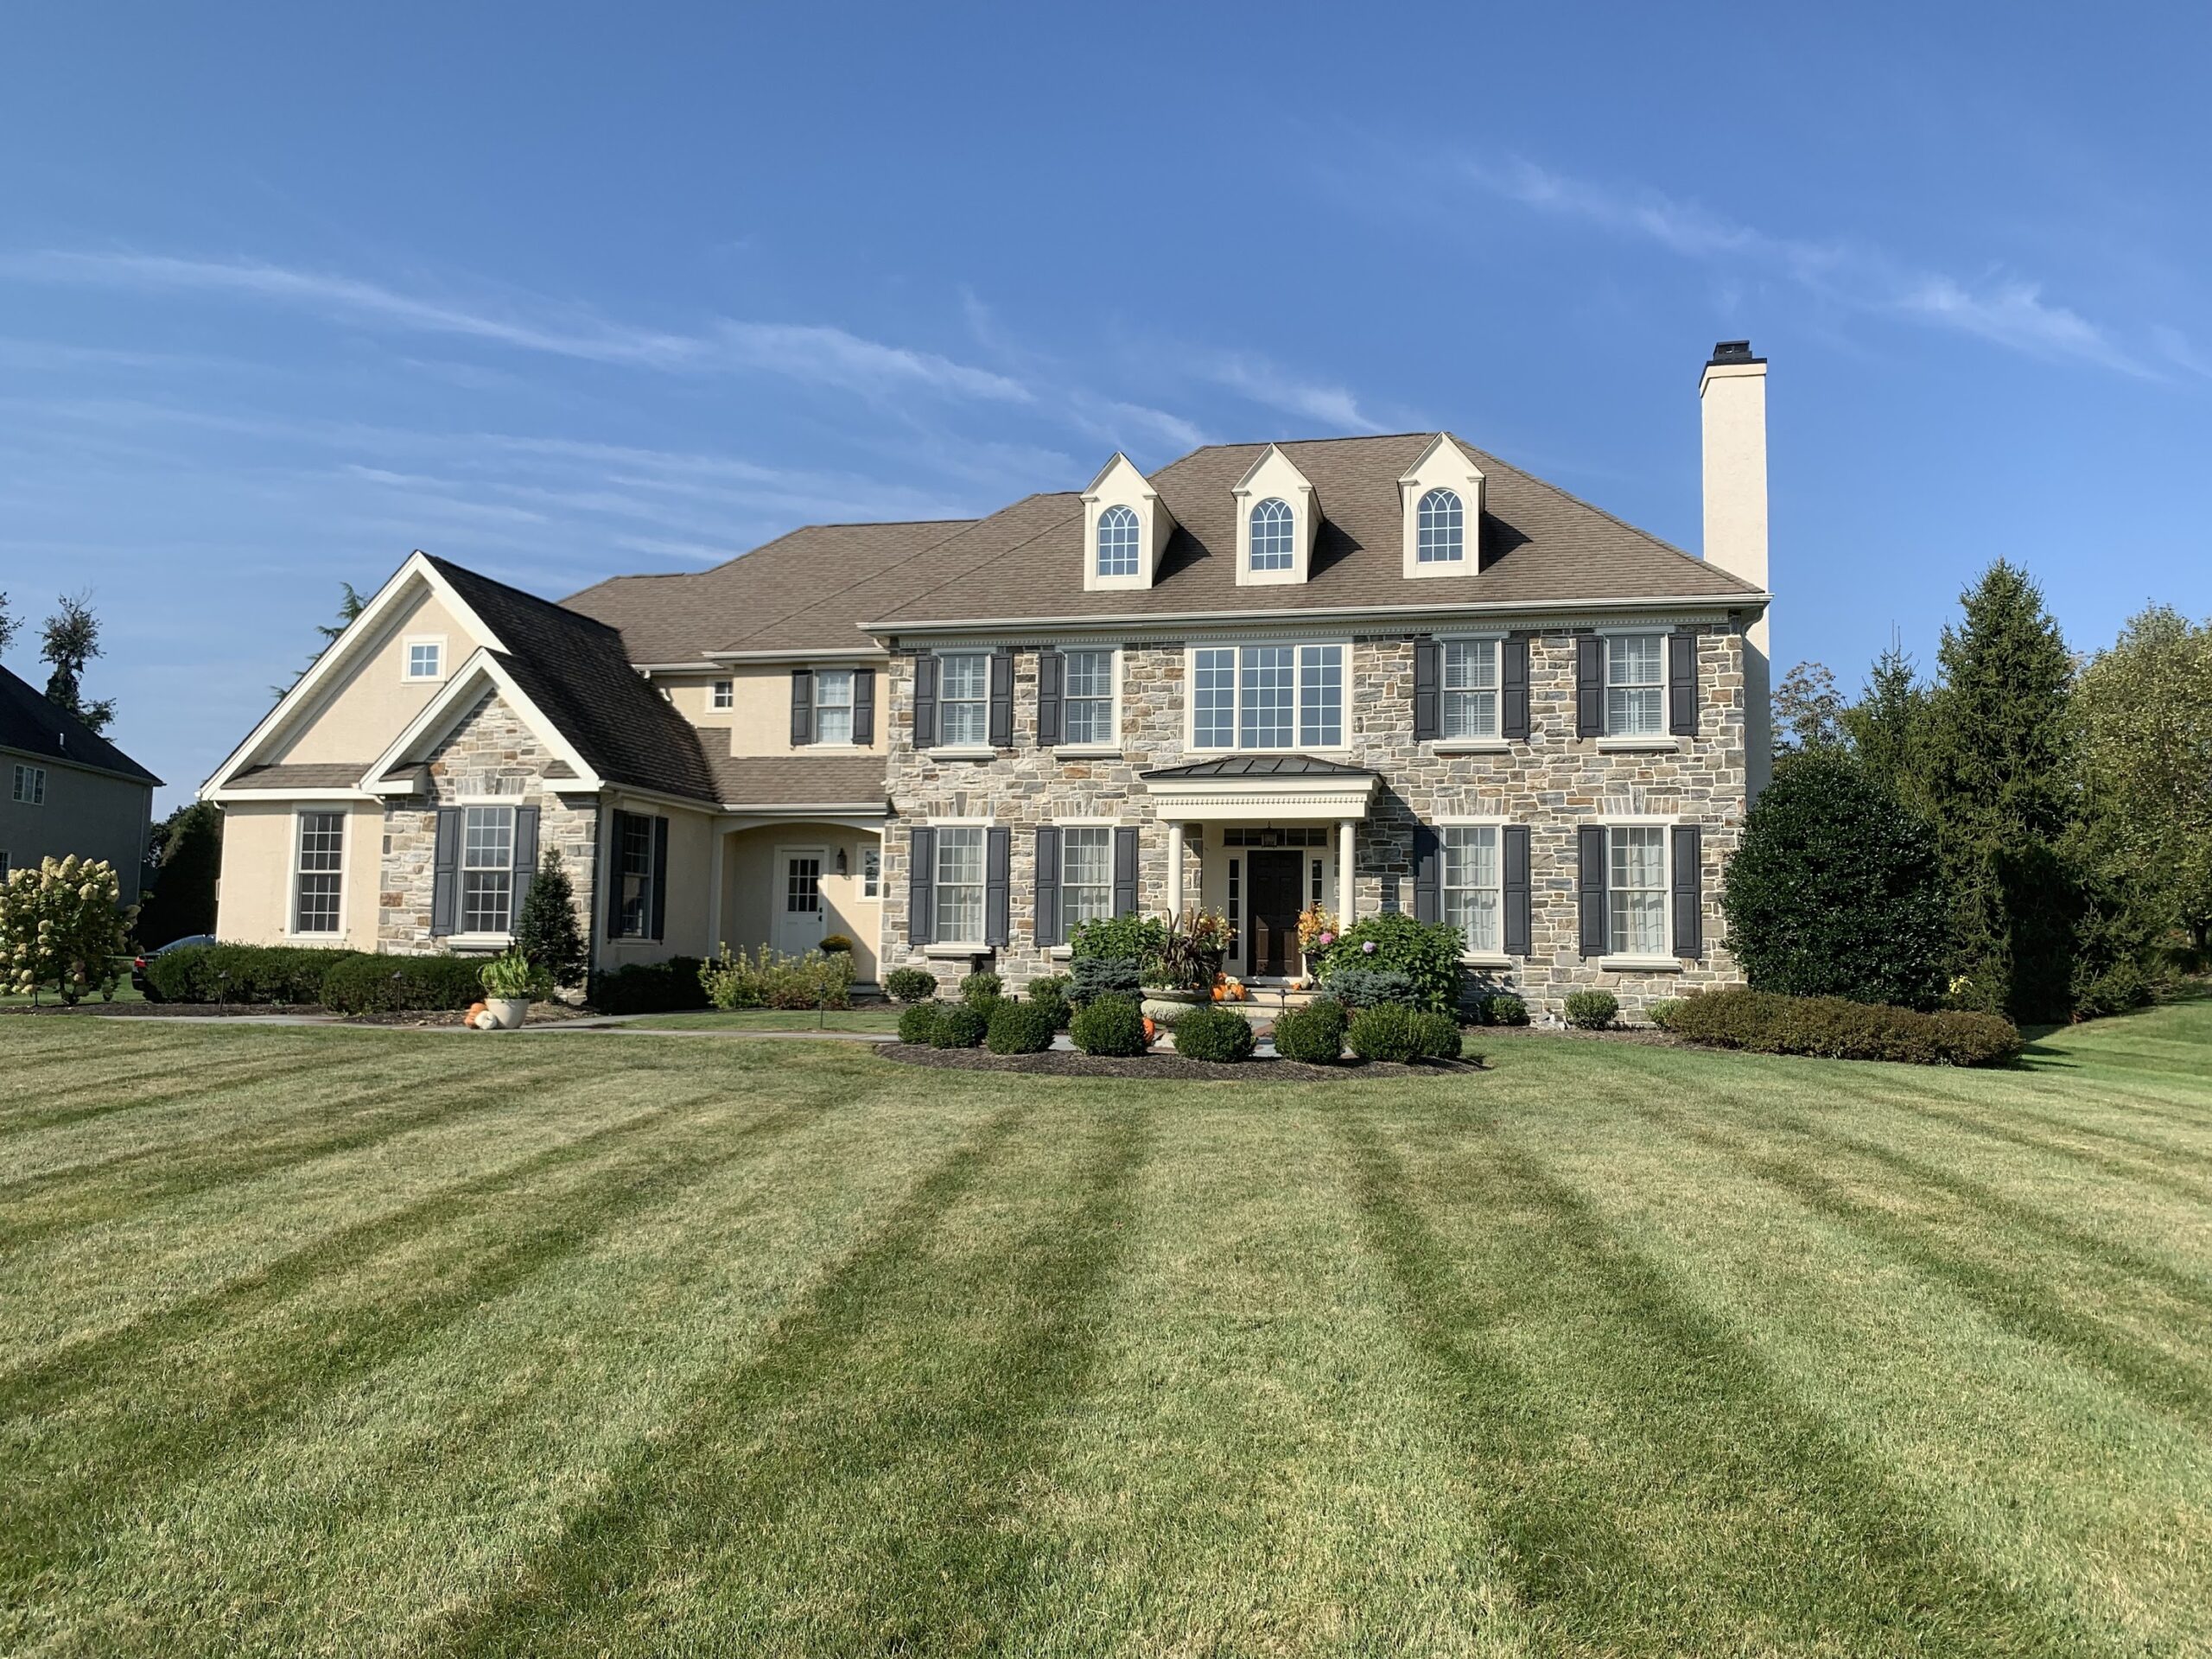 Large home with front yard landscaping